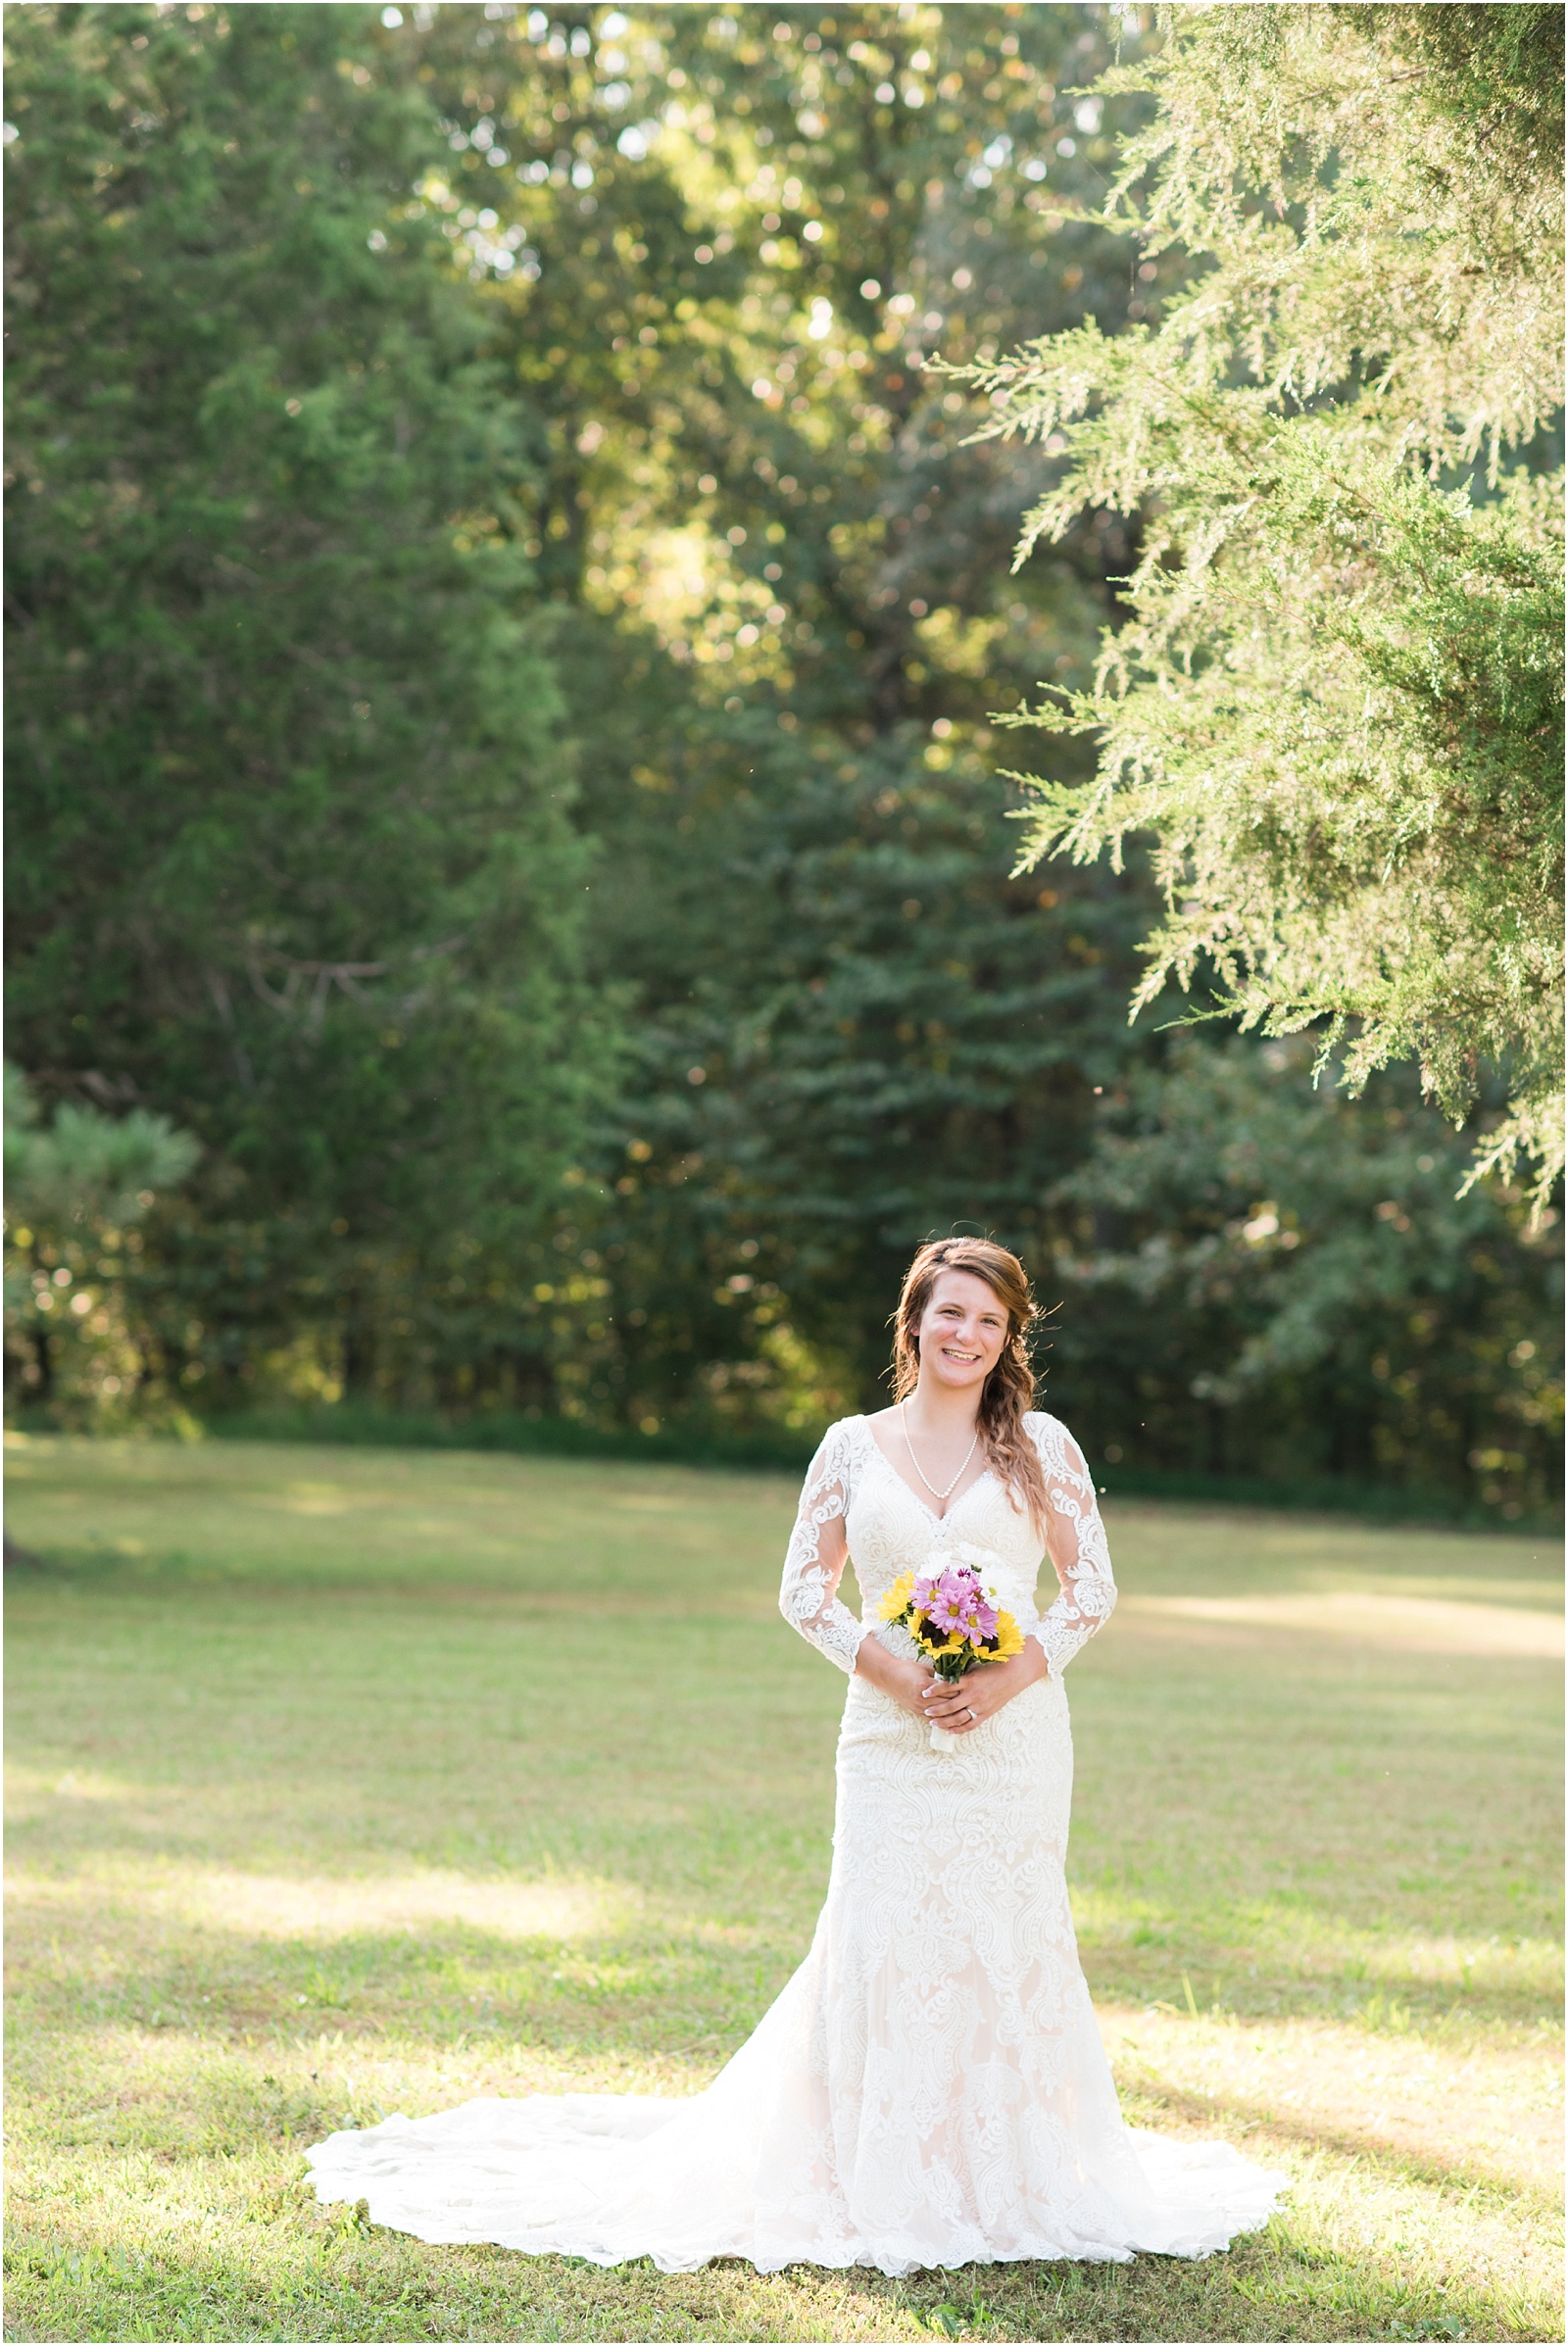 bride holding a sunflower bouquet in the middle of a grassy field with the sun shinning